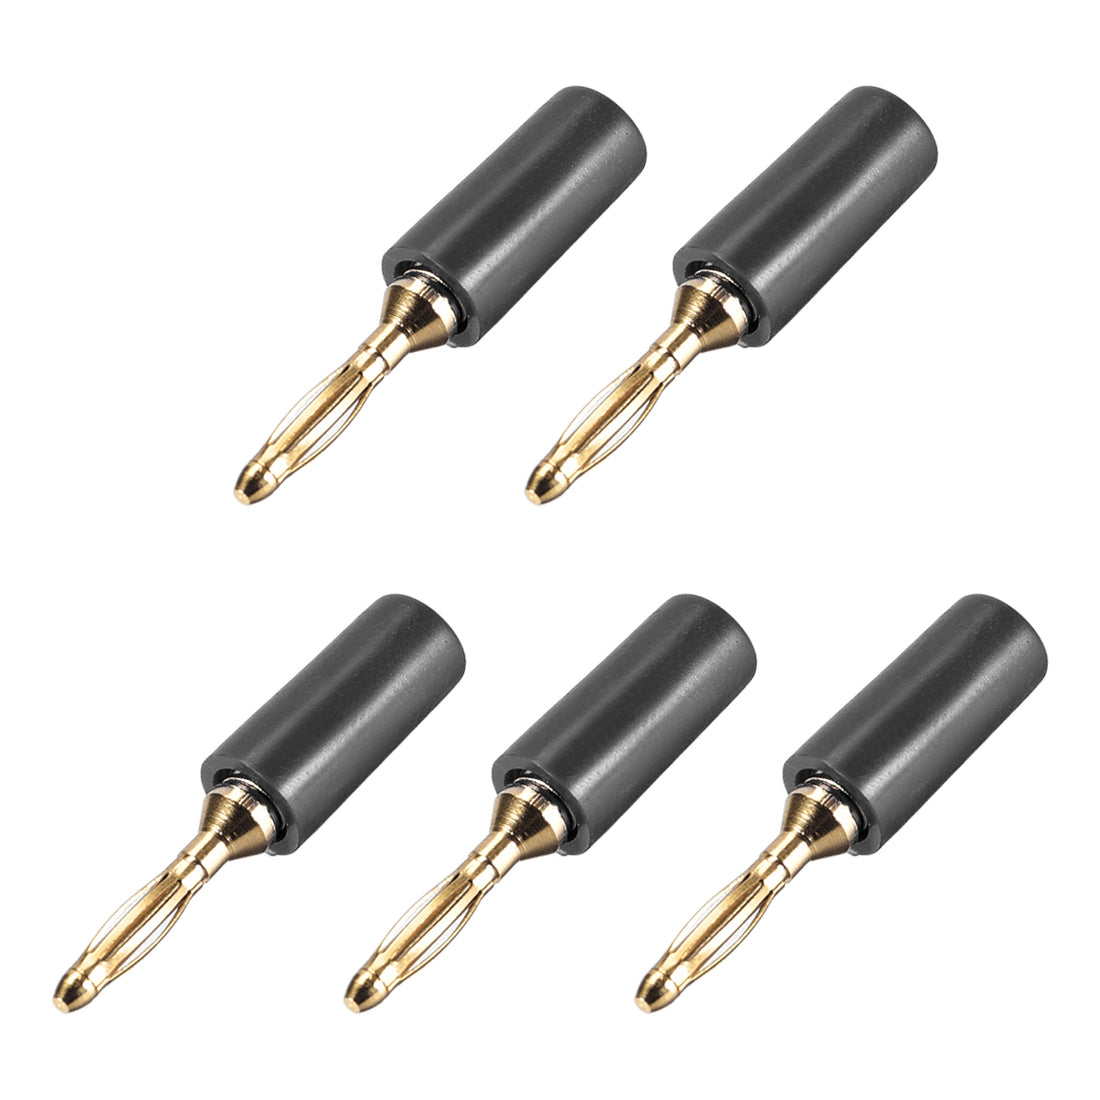 uxcell Uxcell 2mm Banana Speaker Wire Cable Plugs Connectors Gold Black 5pcs Jack Connector